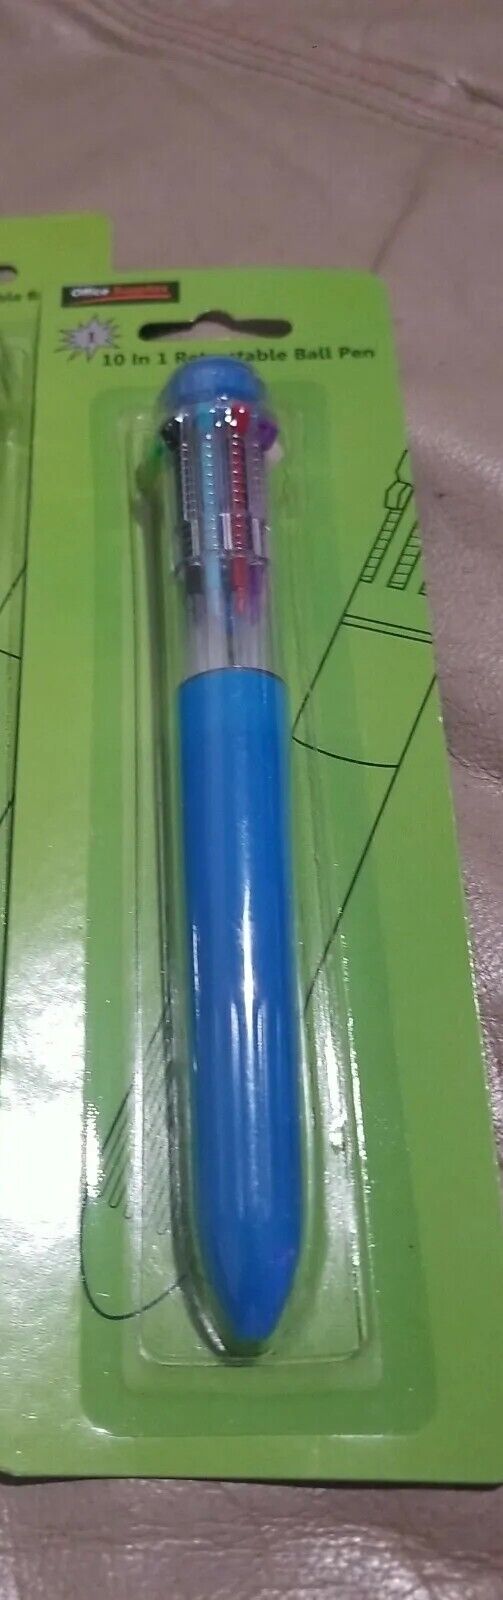 New 10 Colors in 1 Retractable Ball pen